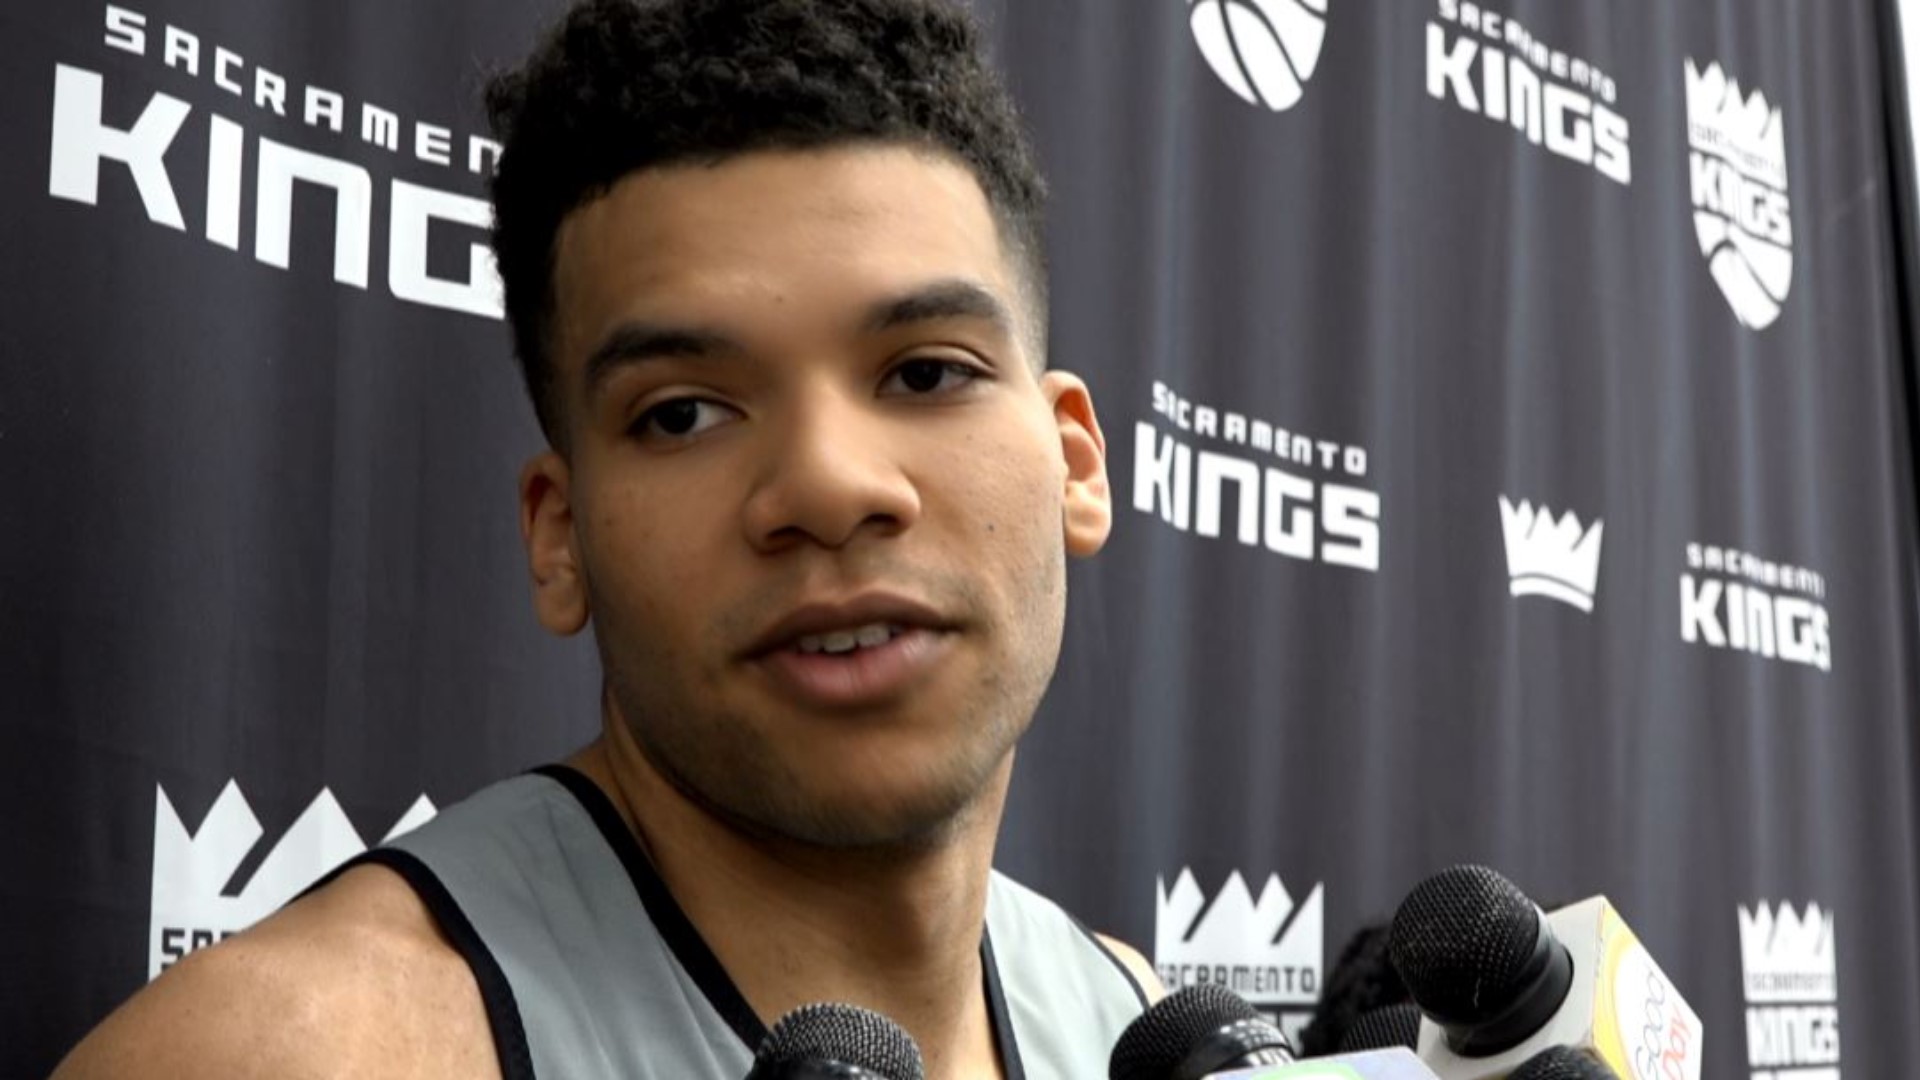 BYU forward Yoeli Childs talks about his pre-draft workout in Sacramento on Monday morning with the Kings and what he expects from this process leading up to the NBA Draft.